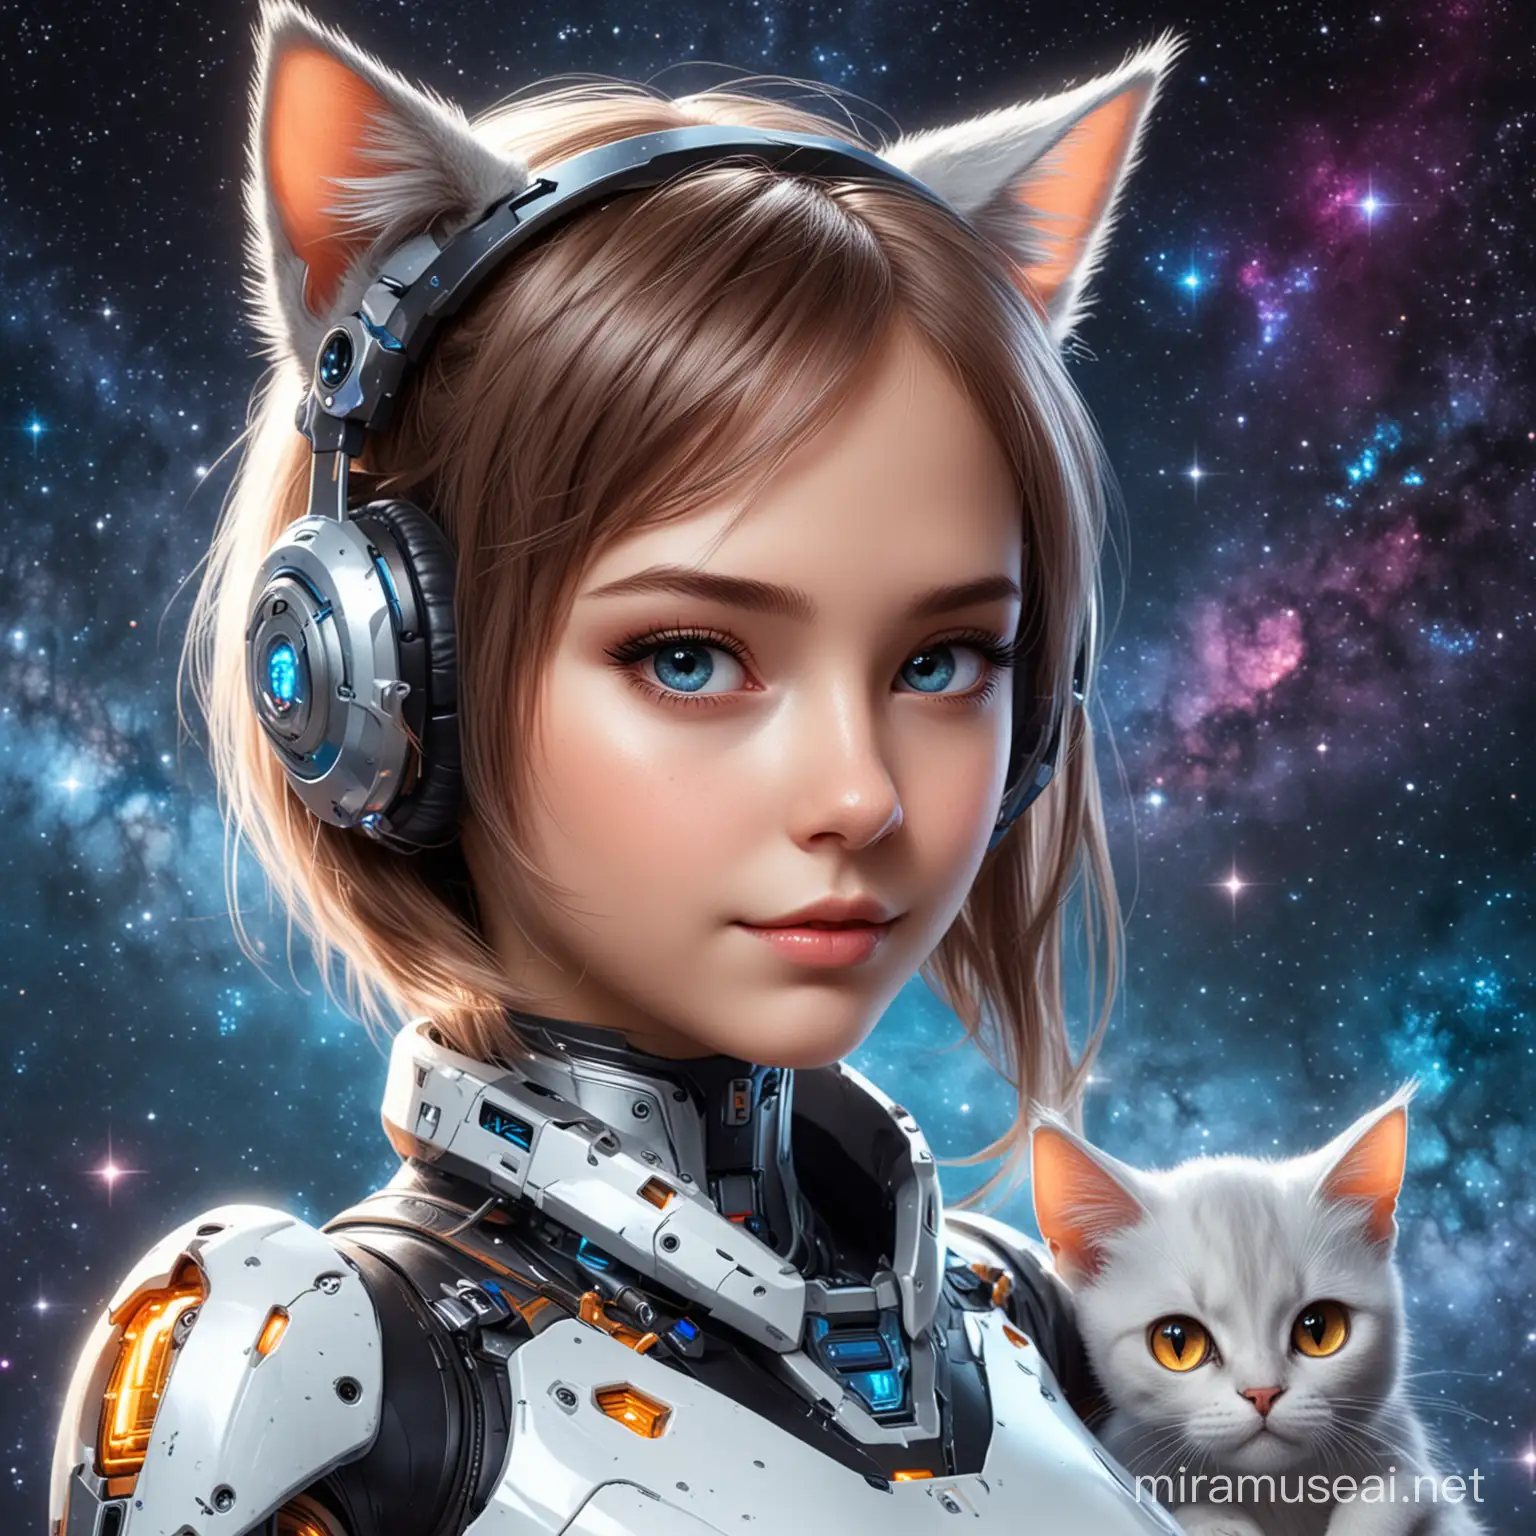 A beautiful girl robochick with a cat ear behind her Galaxy